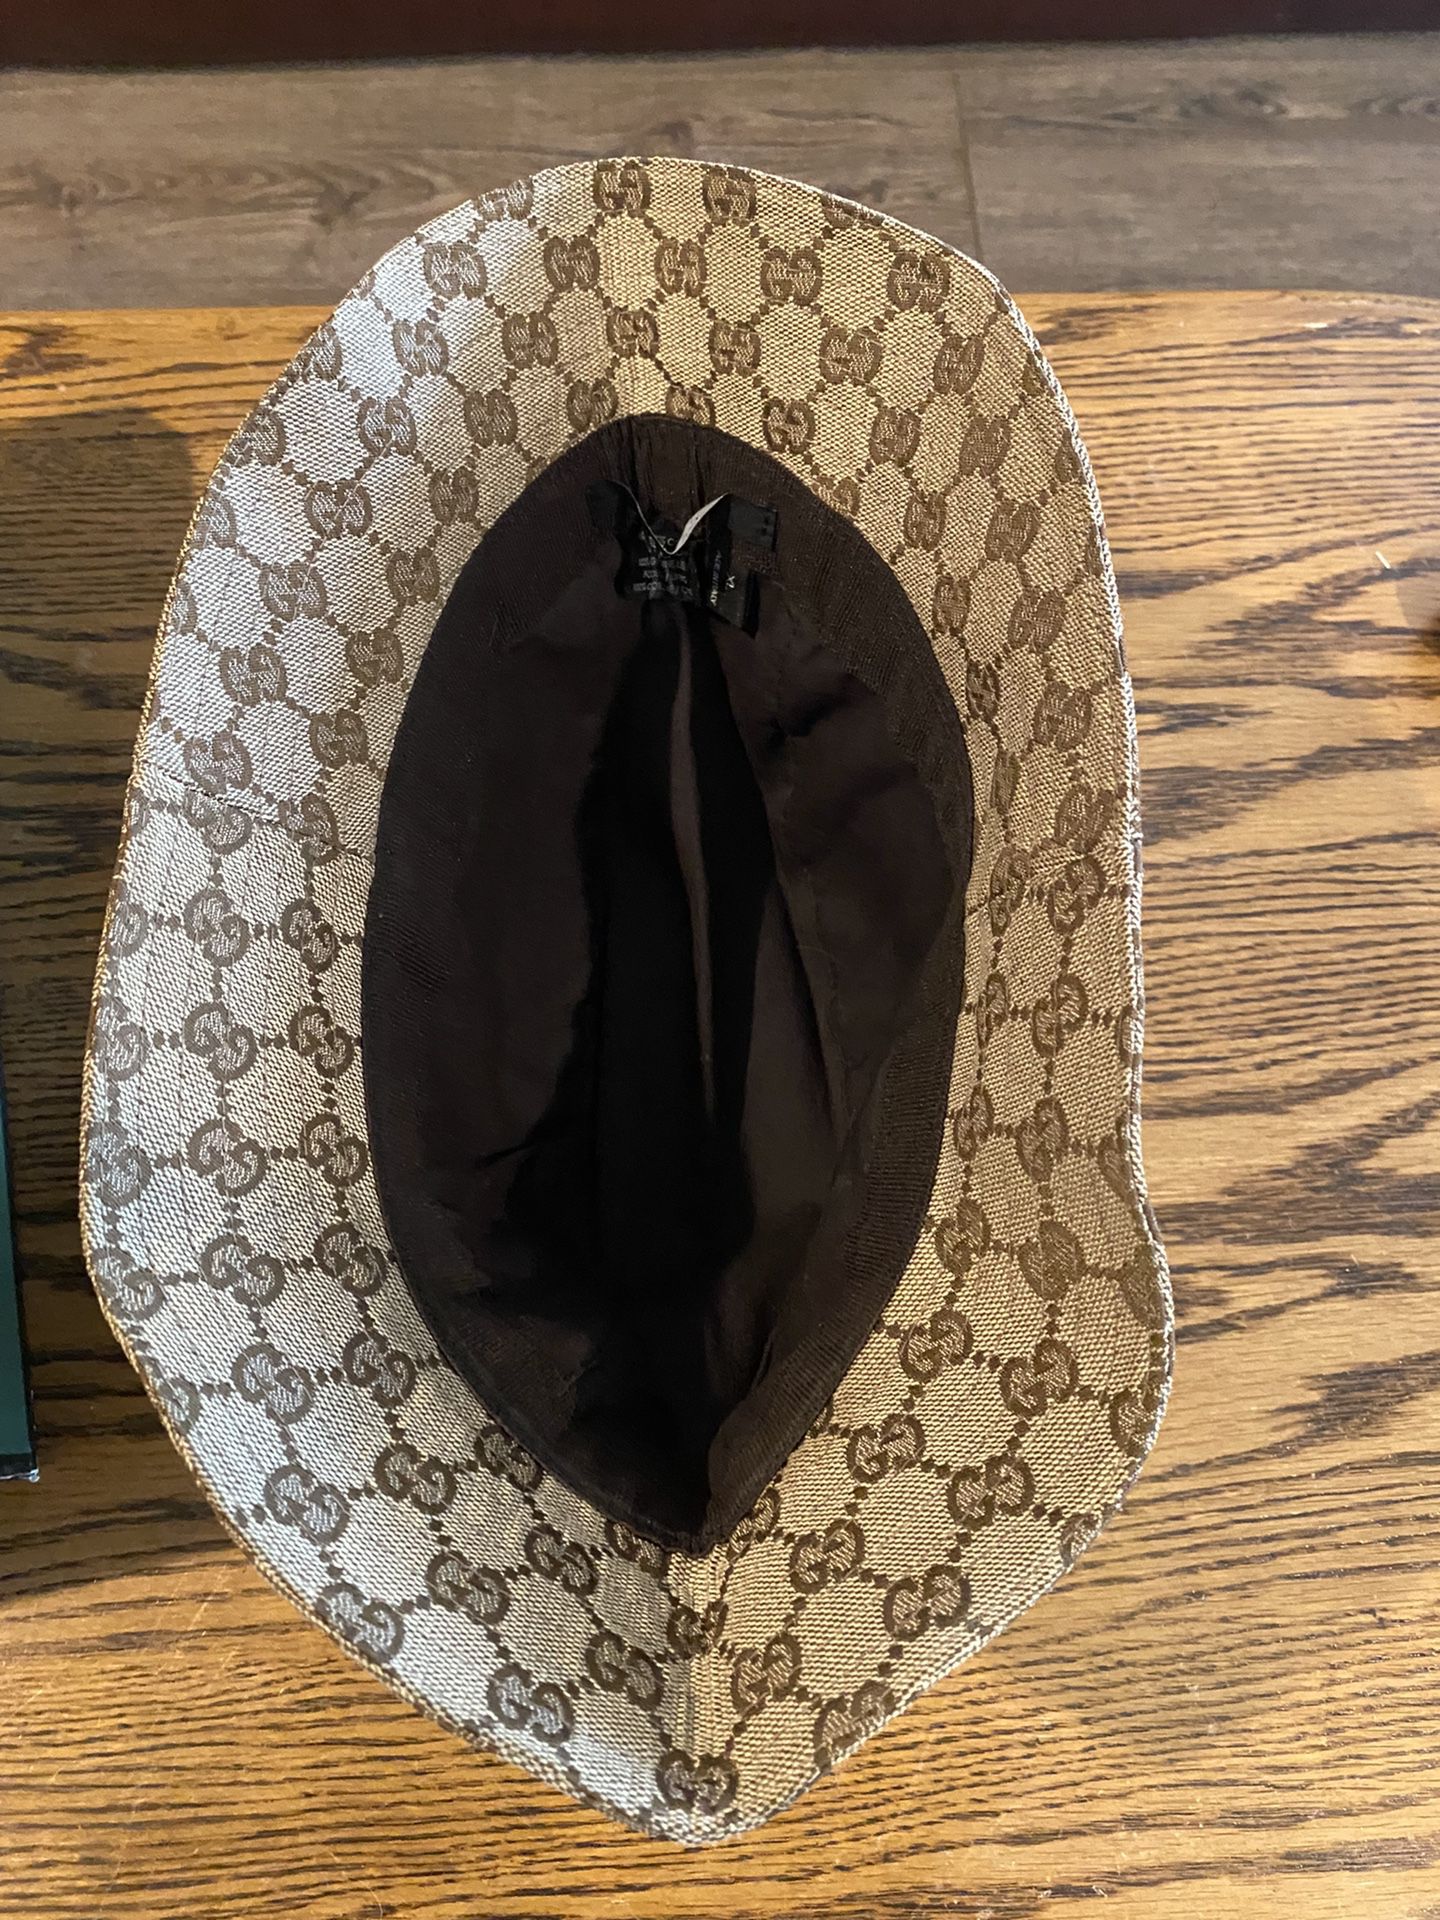 New Gucci Hat (Never Worn) for Sale in Edgewood, WA - OfferUp